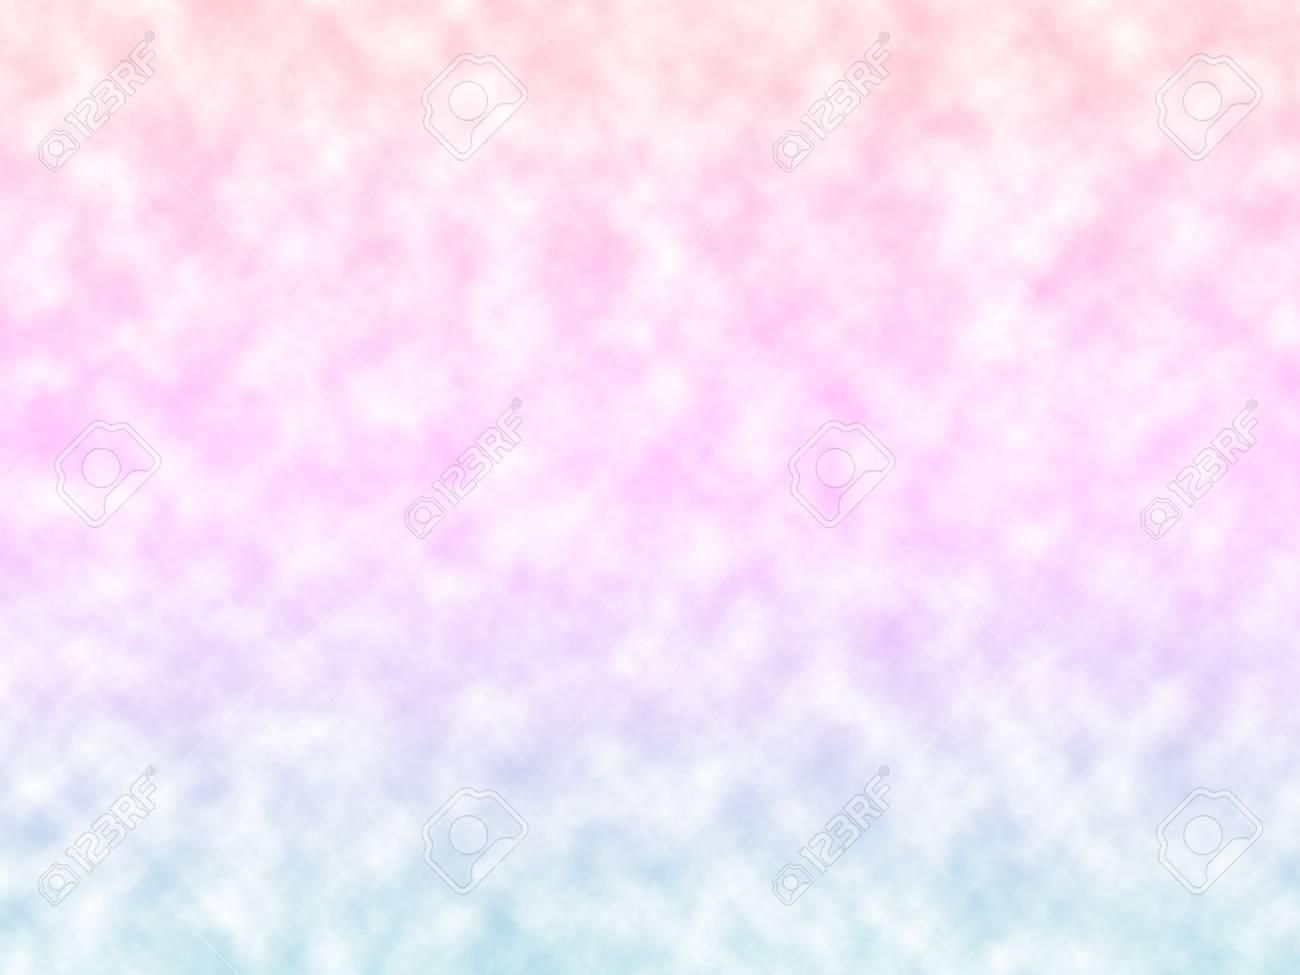 Pastel Color Wallpaper (image in Collection)